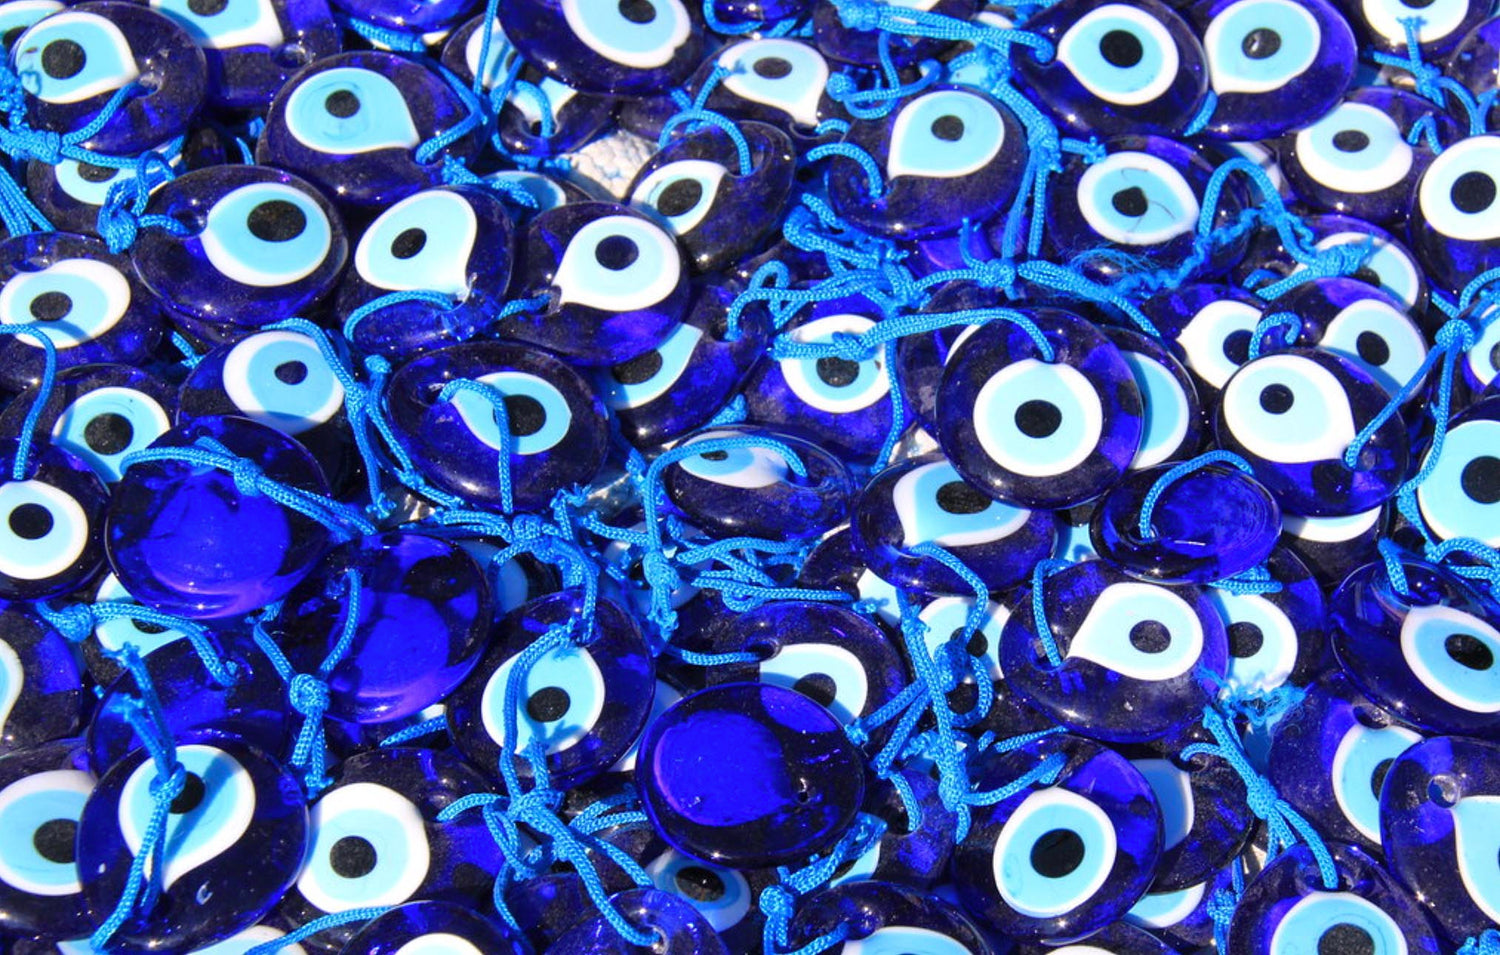 What is the Evil Eye?